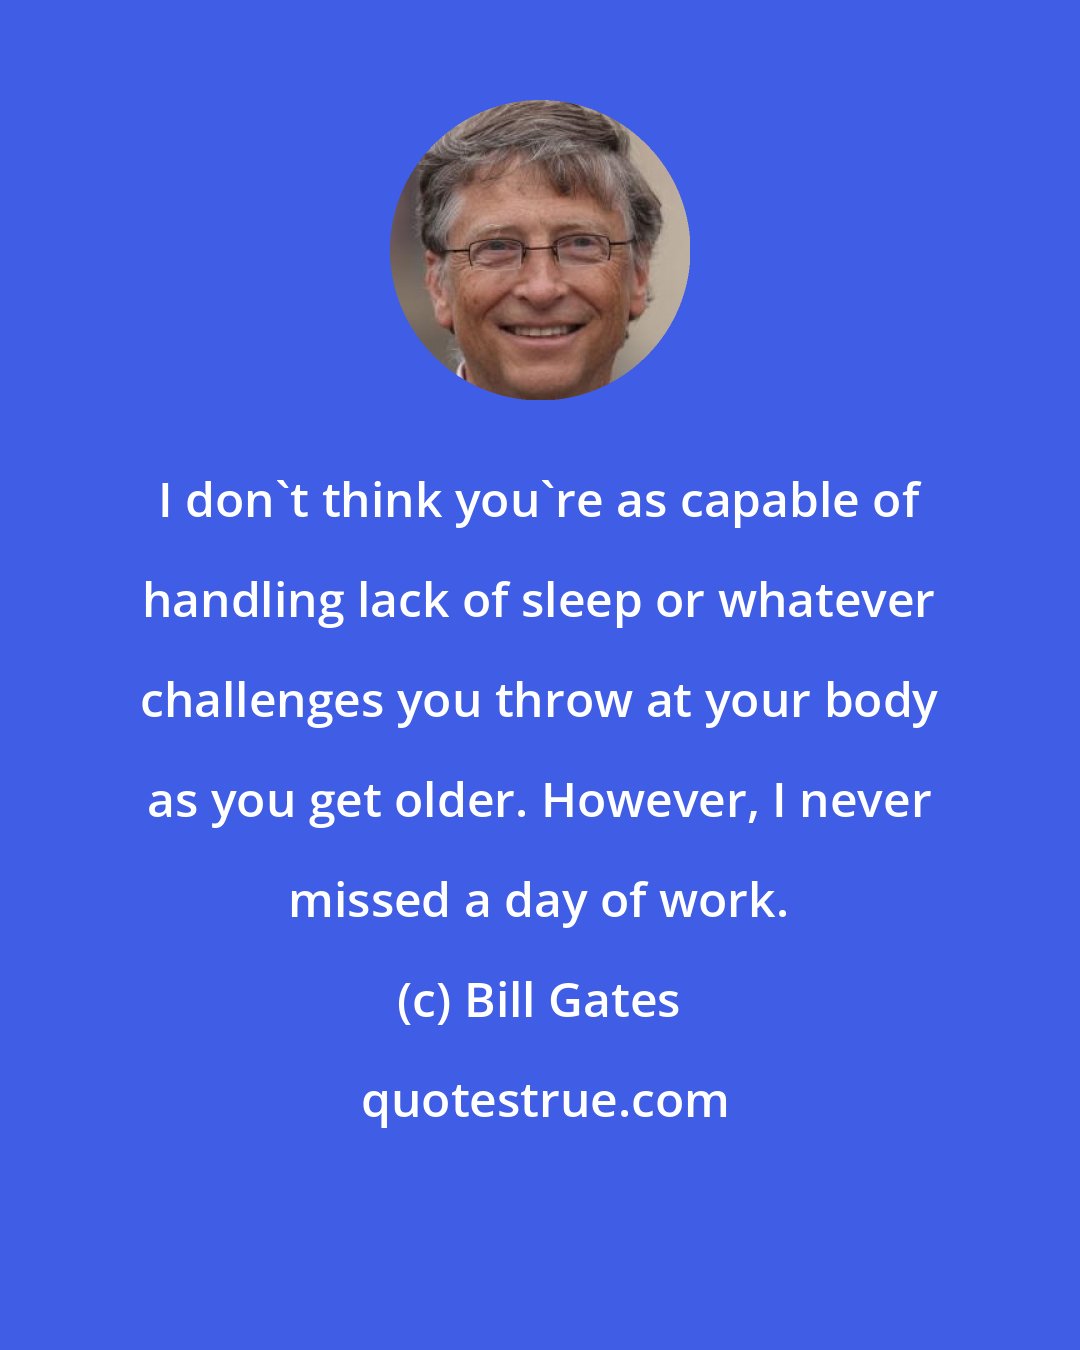 Bill Gates: I don't think you're as capable of handling lack of sleep or whatever challenges you throw at your body as you get older. However, I never missed a day of work.